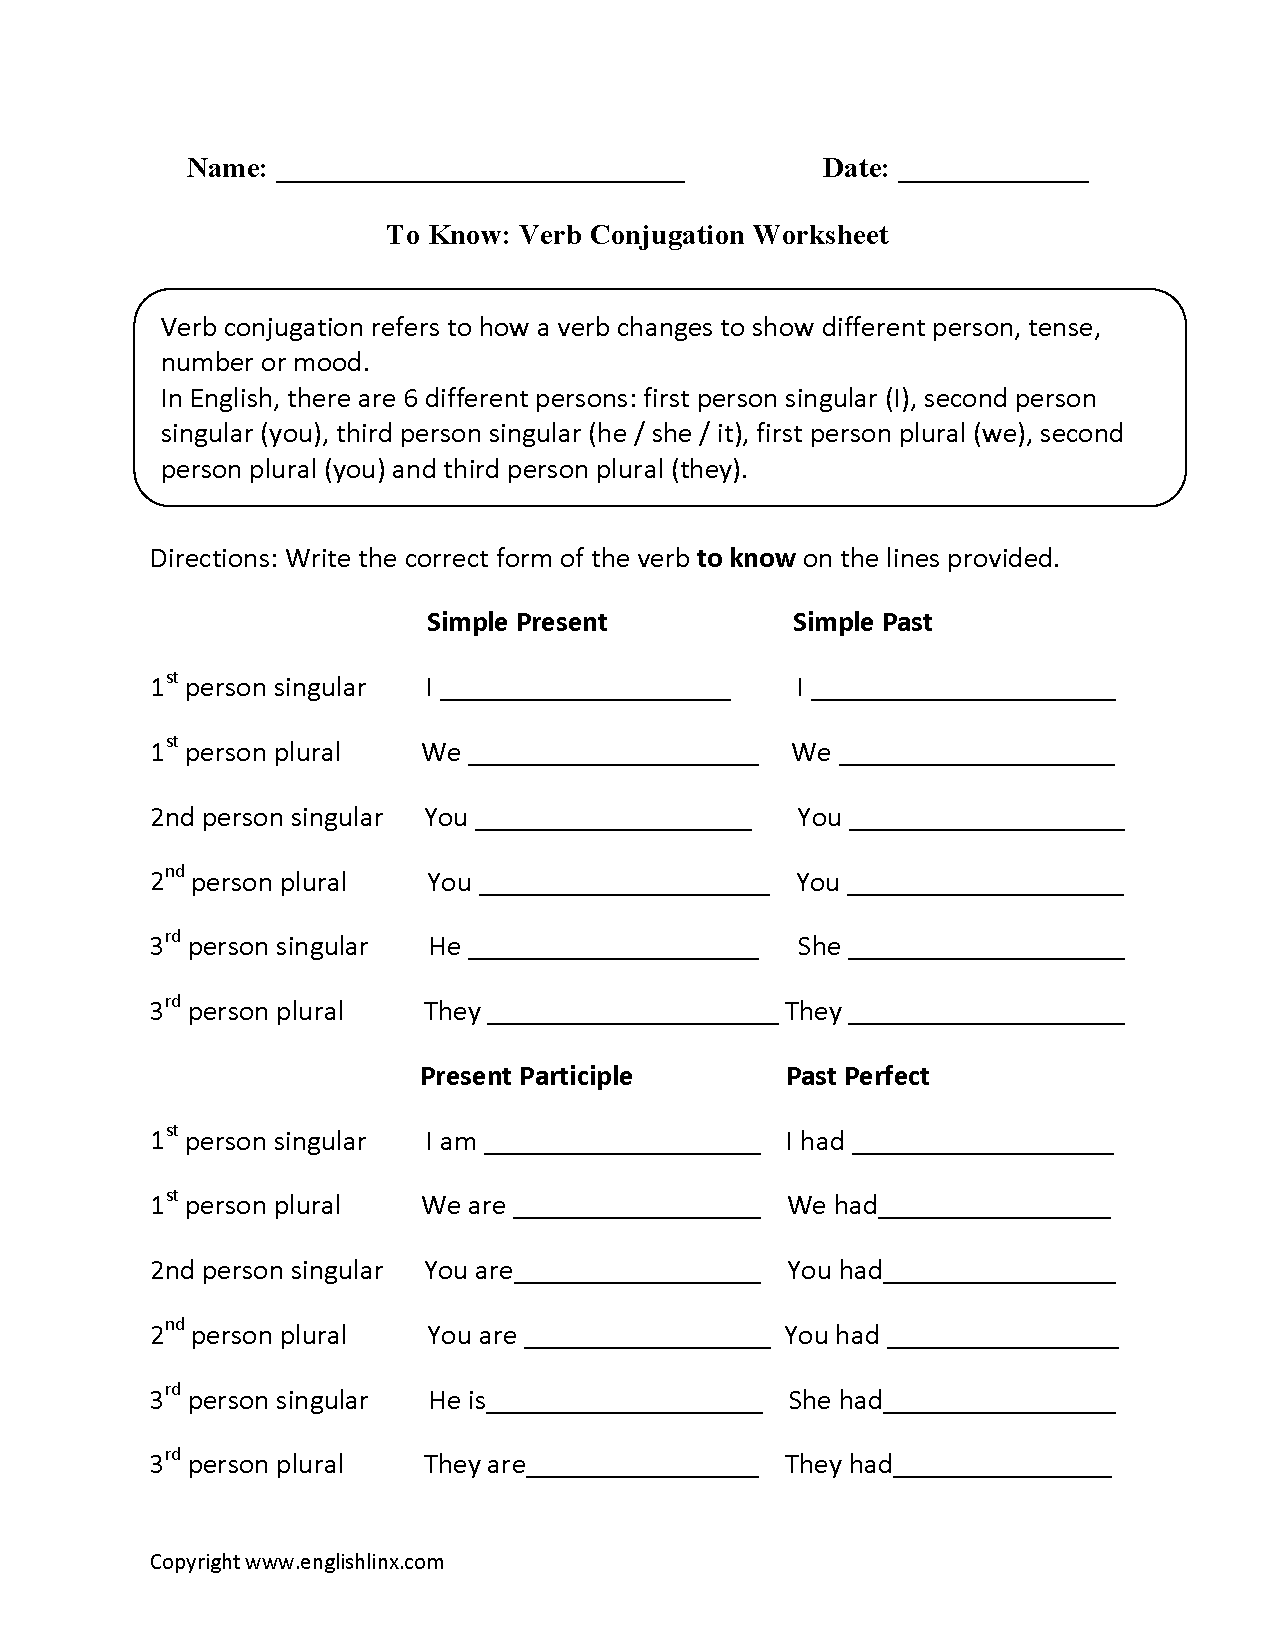 To Know Verb Conjugation Worksheets